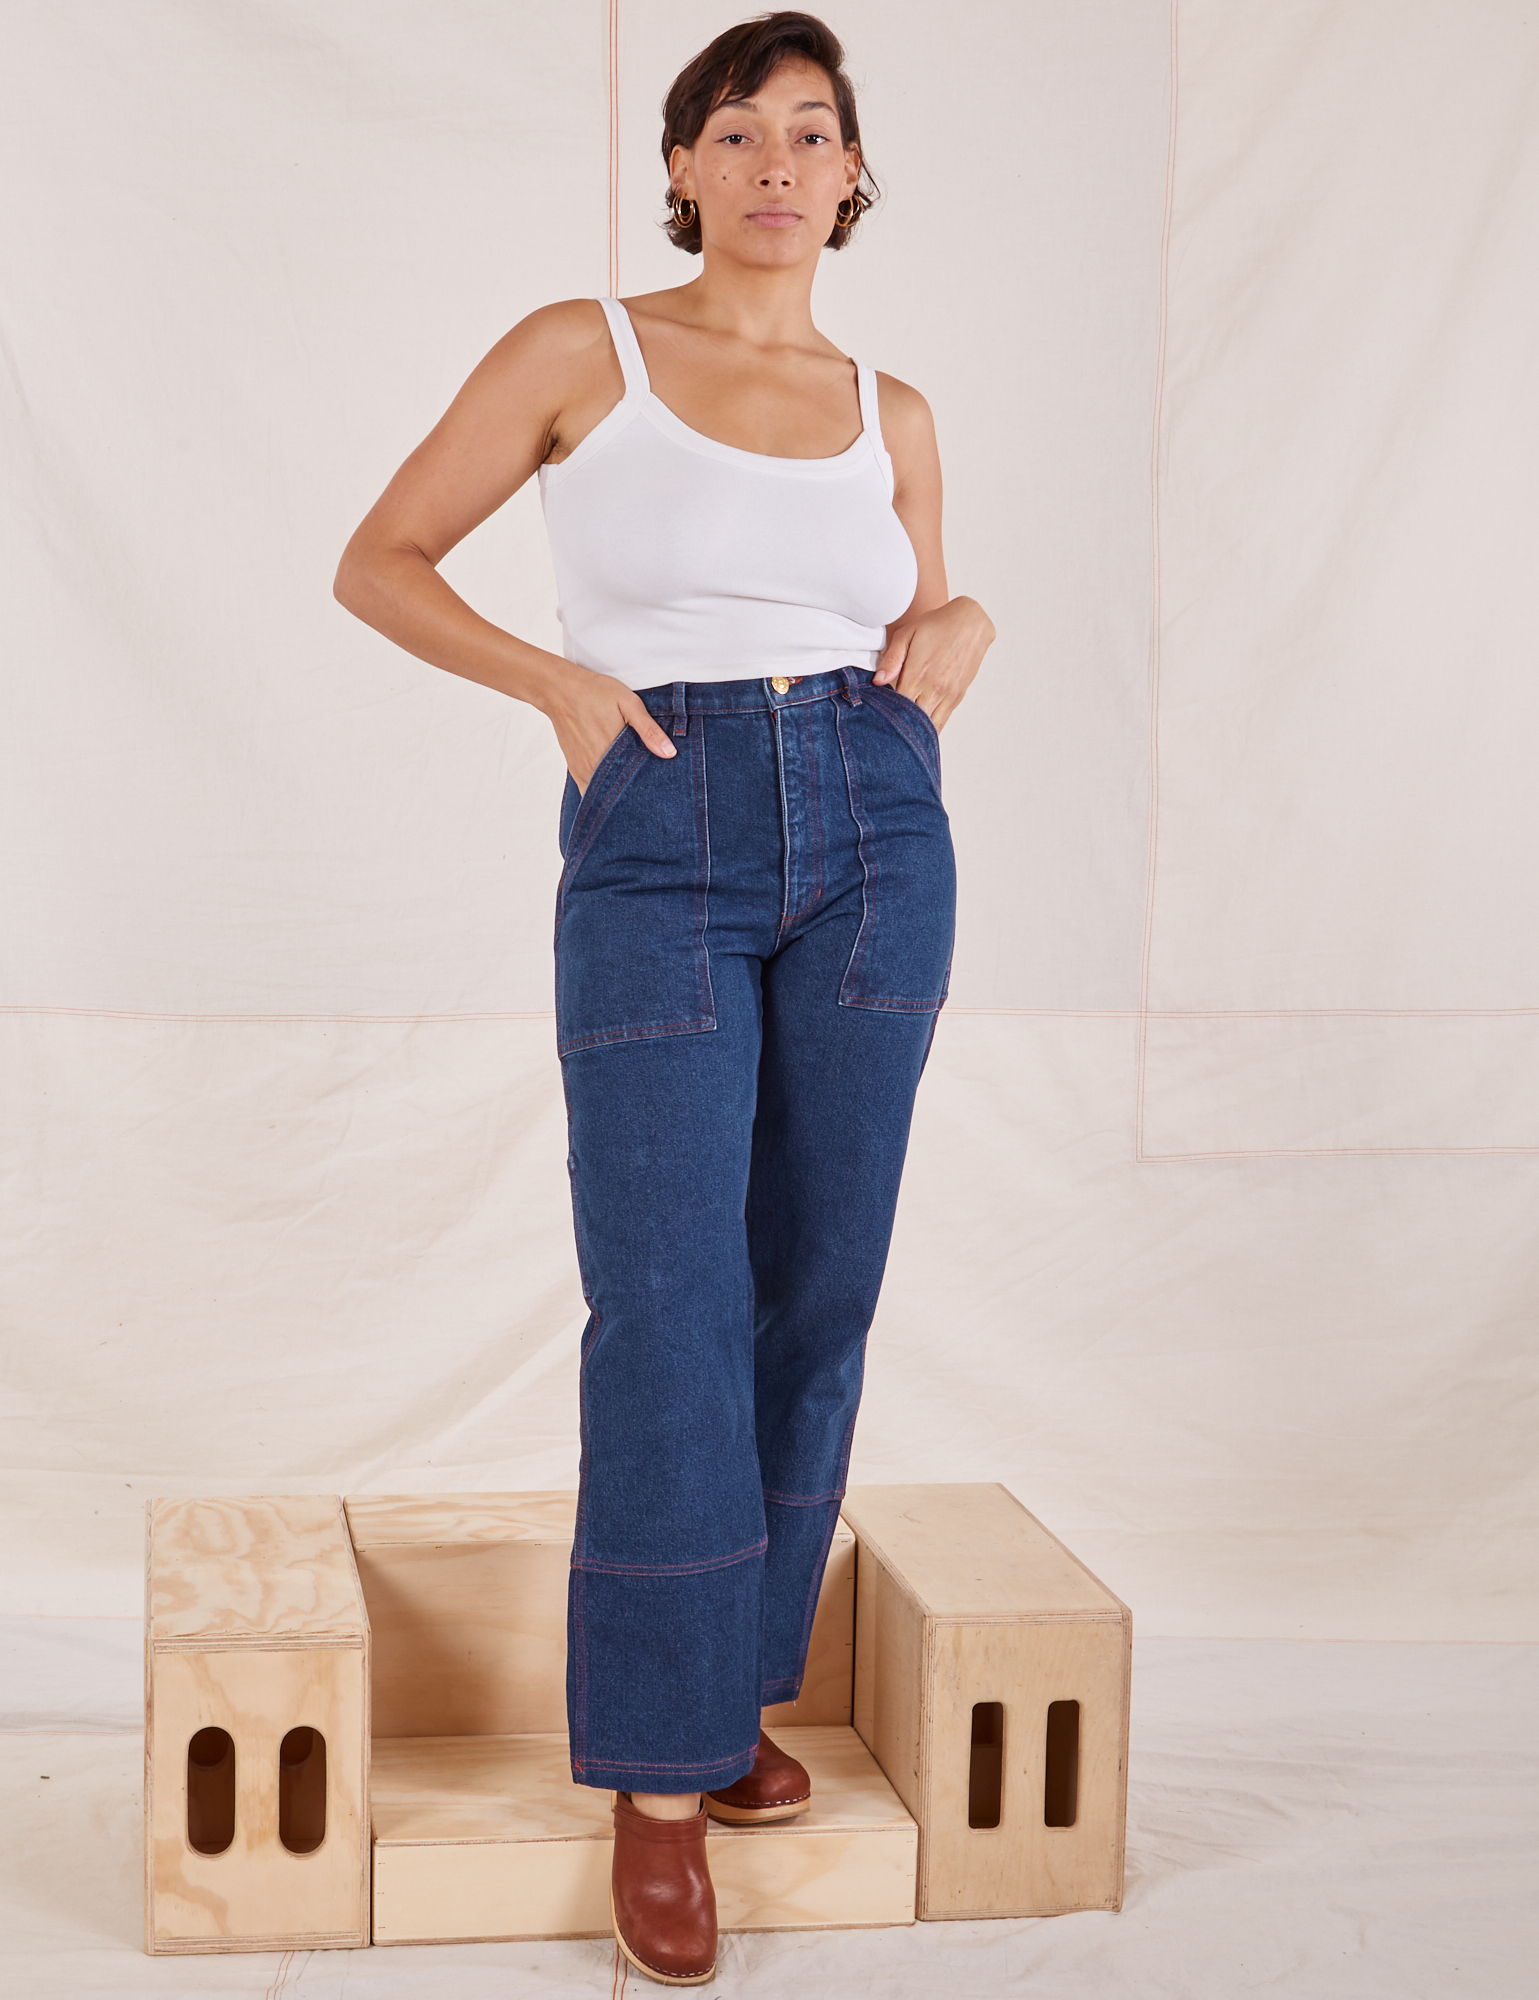 Tiara is wearing Carpenter Jeans in Dark Wash and Cropped Cami in vintage tee off-white